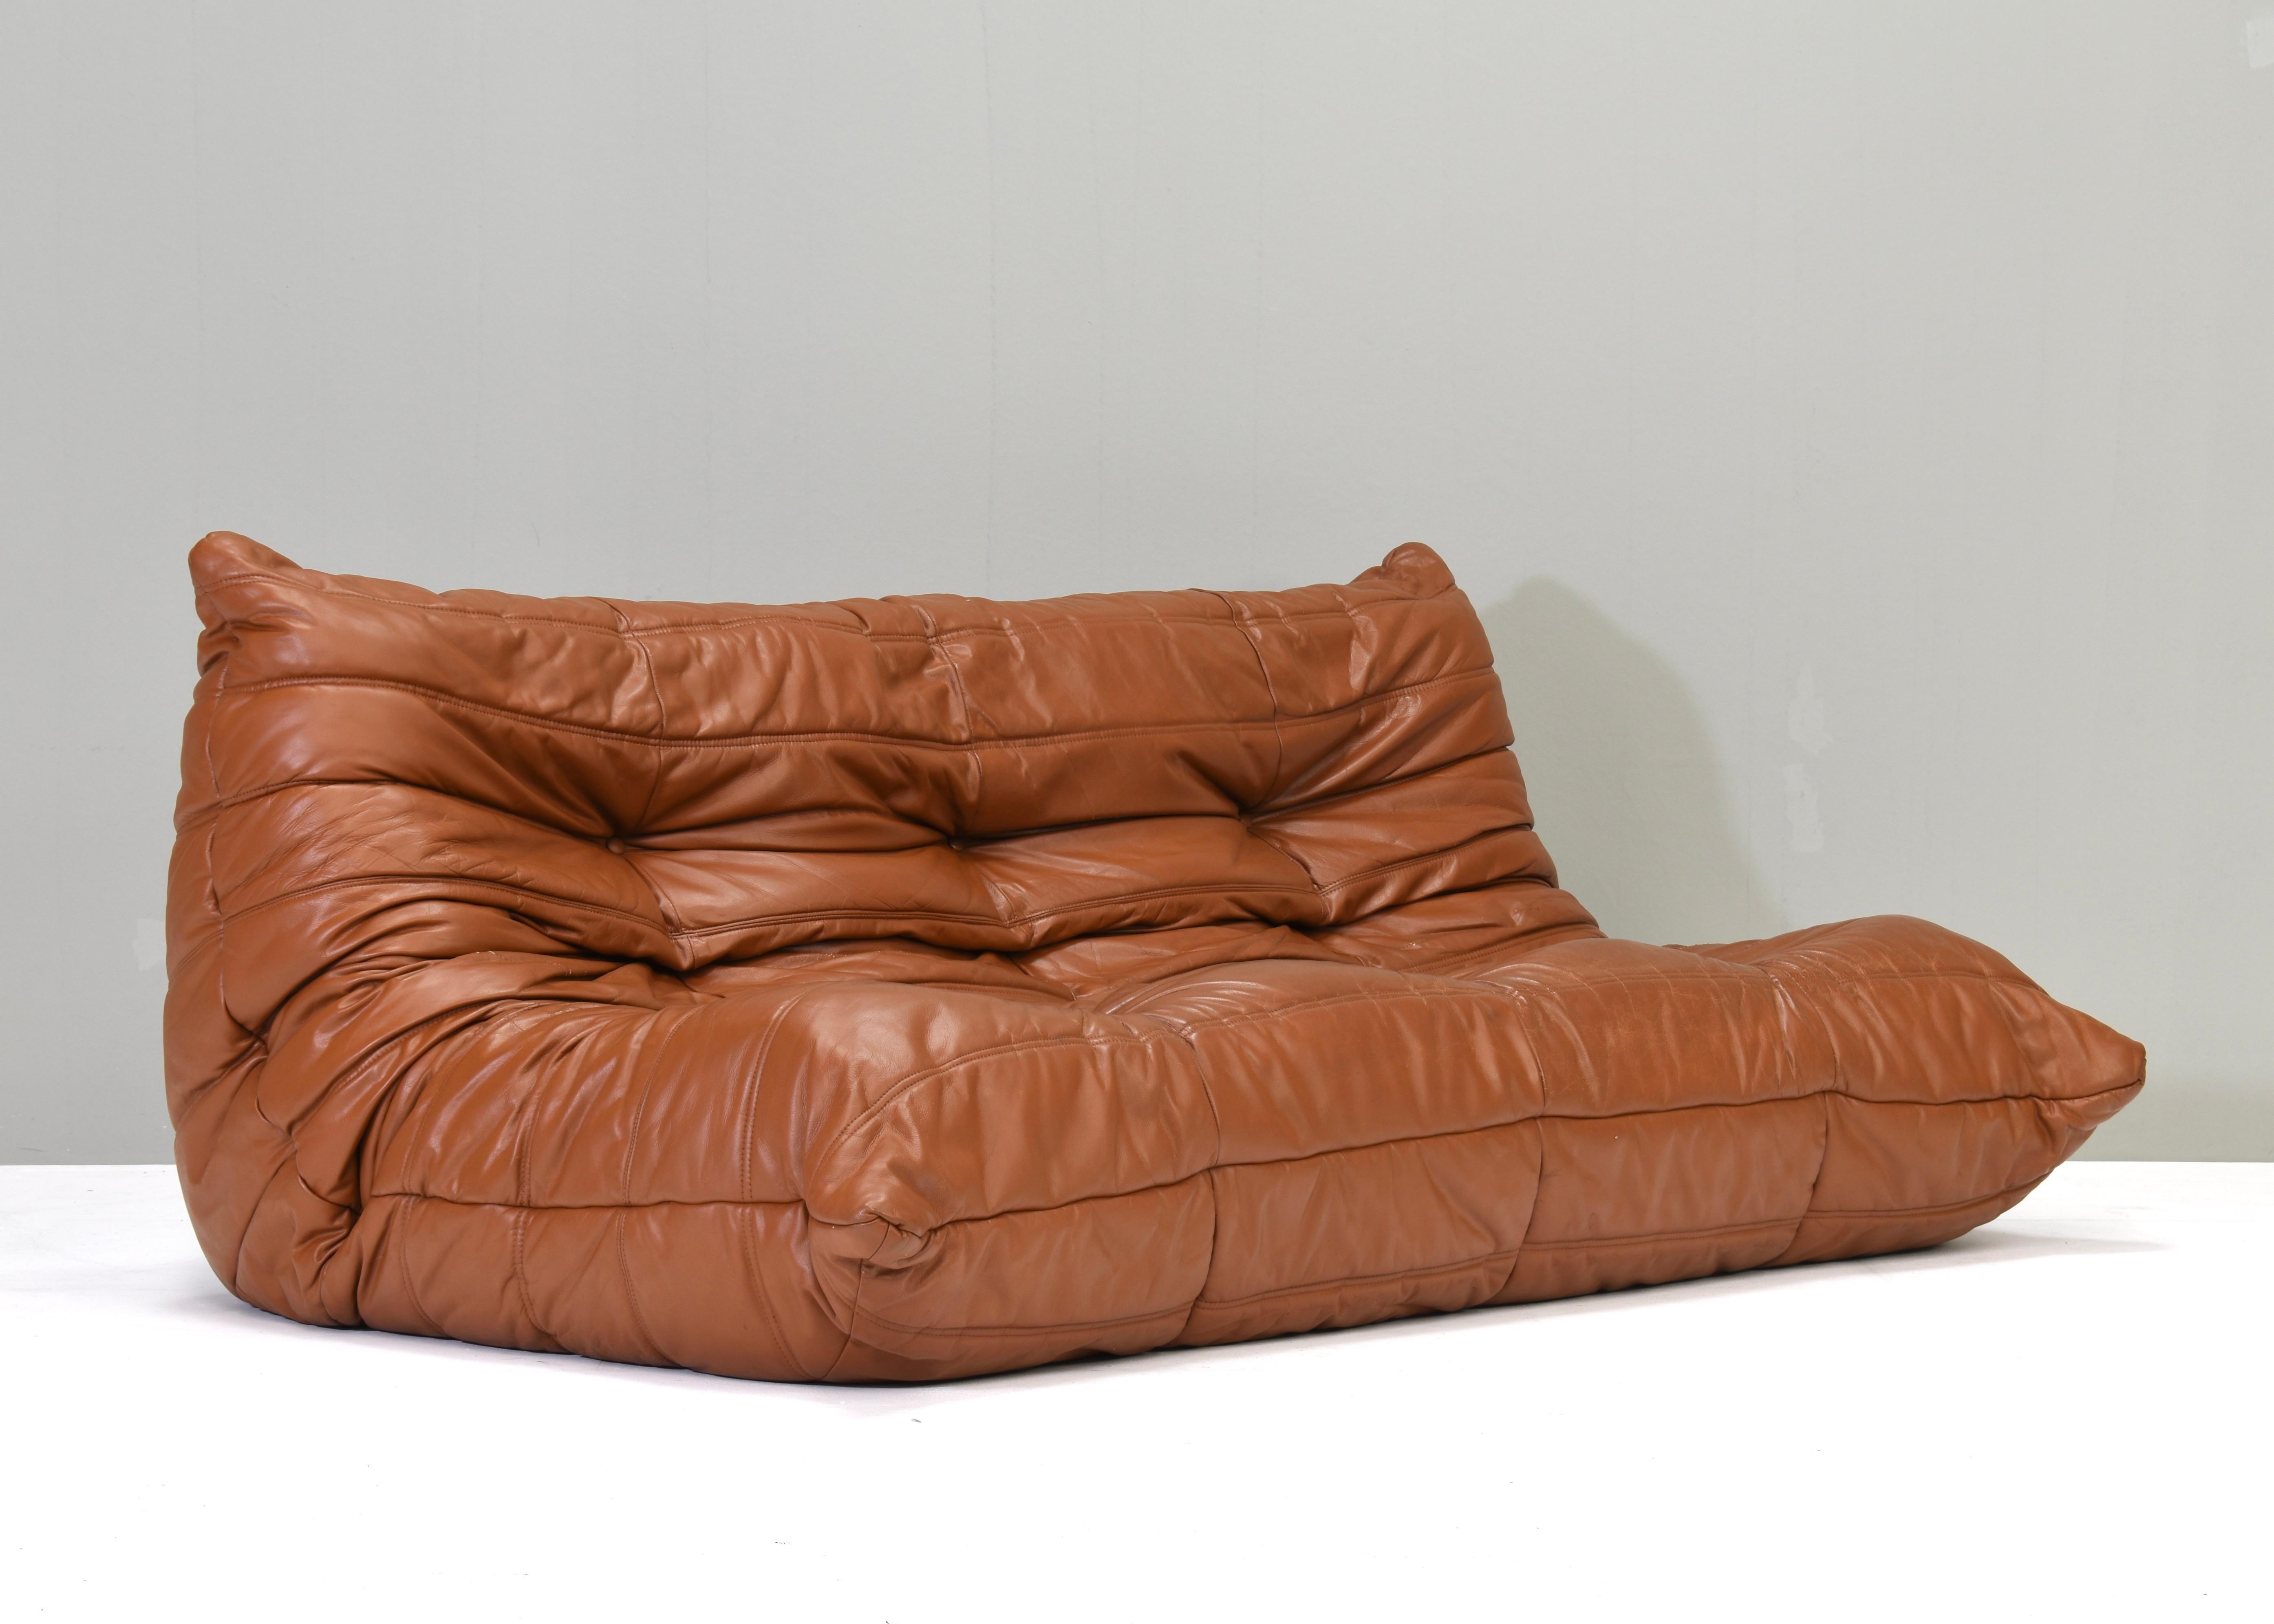 Togo sofa in tan leather by Michel Ducaroy for Ligne Roset, France – circa 1970.
The element is in good condition with some age and use related wear to the leather. See detail images. No tears or holes. The sofa has a label, the corner doesn’t